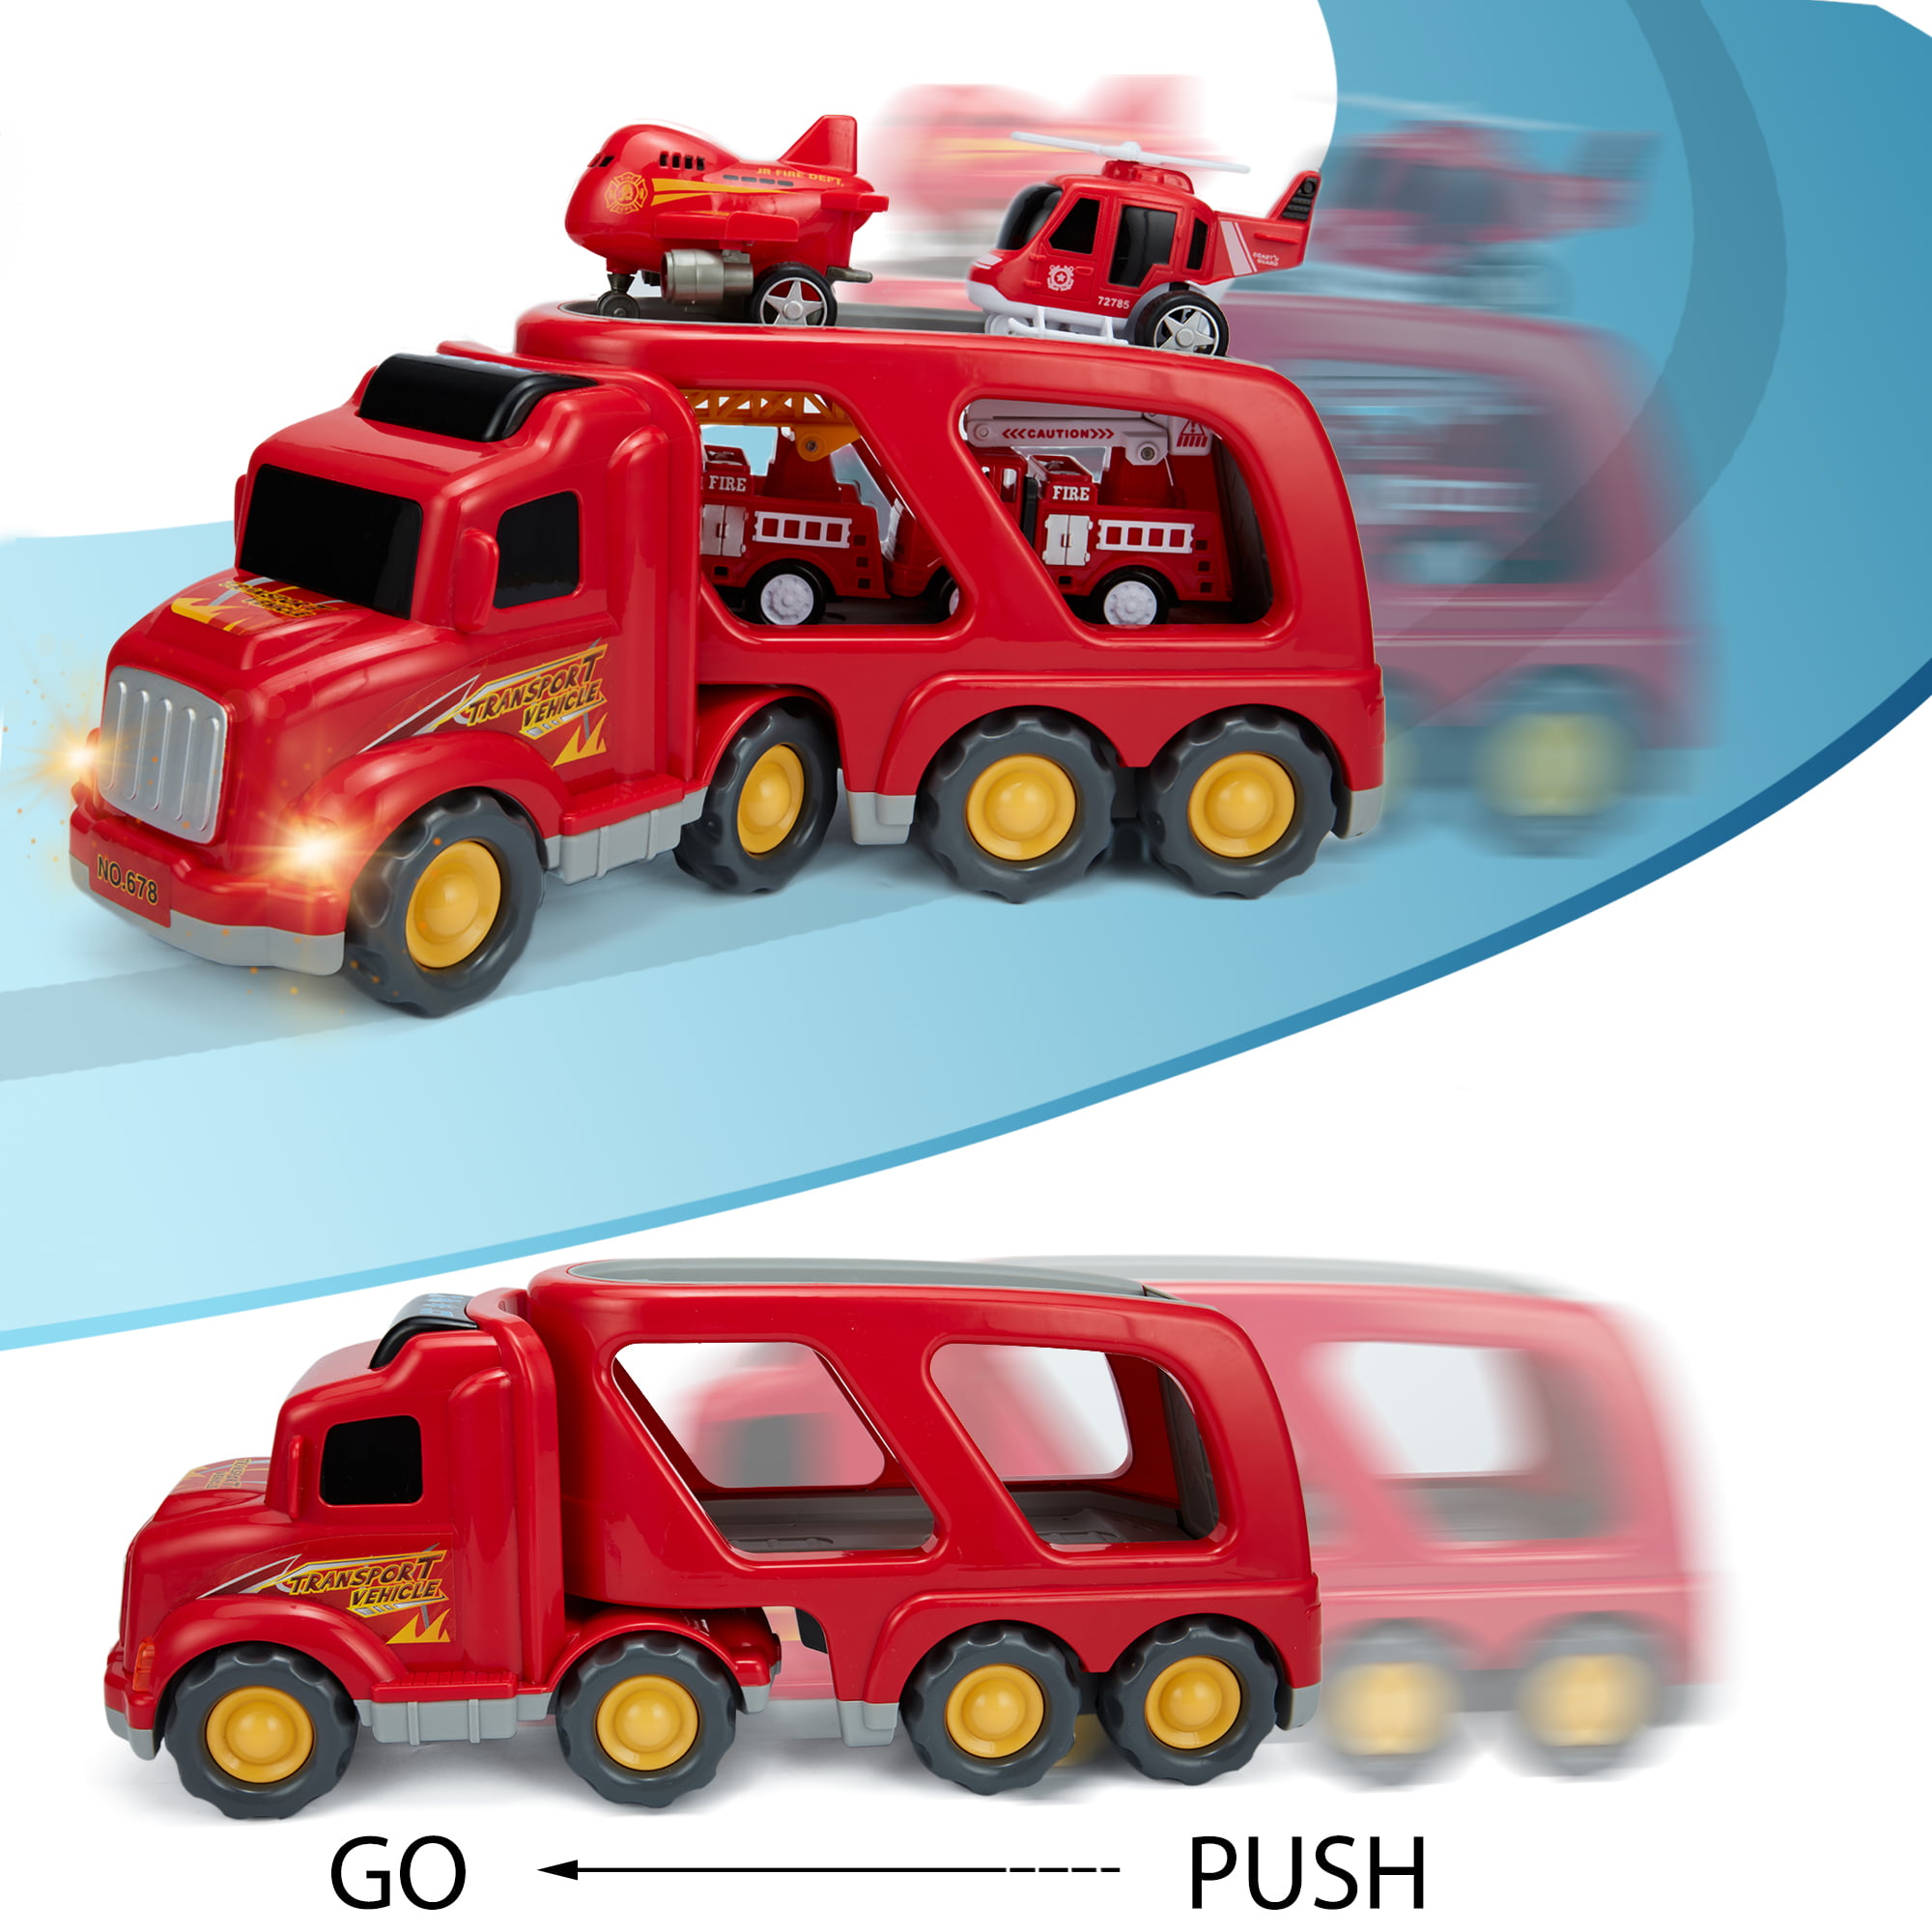 HOLA 6 Pack Toy Cars for Toddlers Push and Go Airplane Outside Educational Toy Trucks for Boys Girls Age 2-3 1 2 3 Year Old Race Car Fire Engine Train Vehicle Toys Set Dump Truck Toys Car 